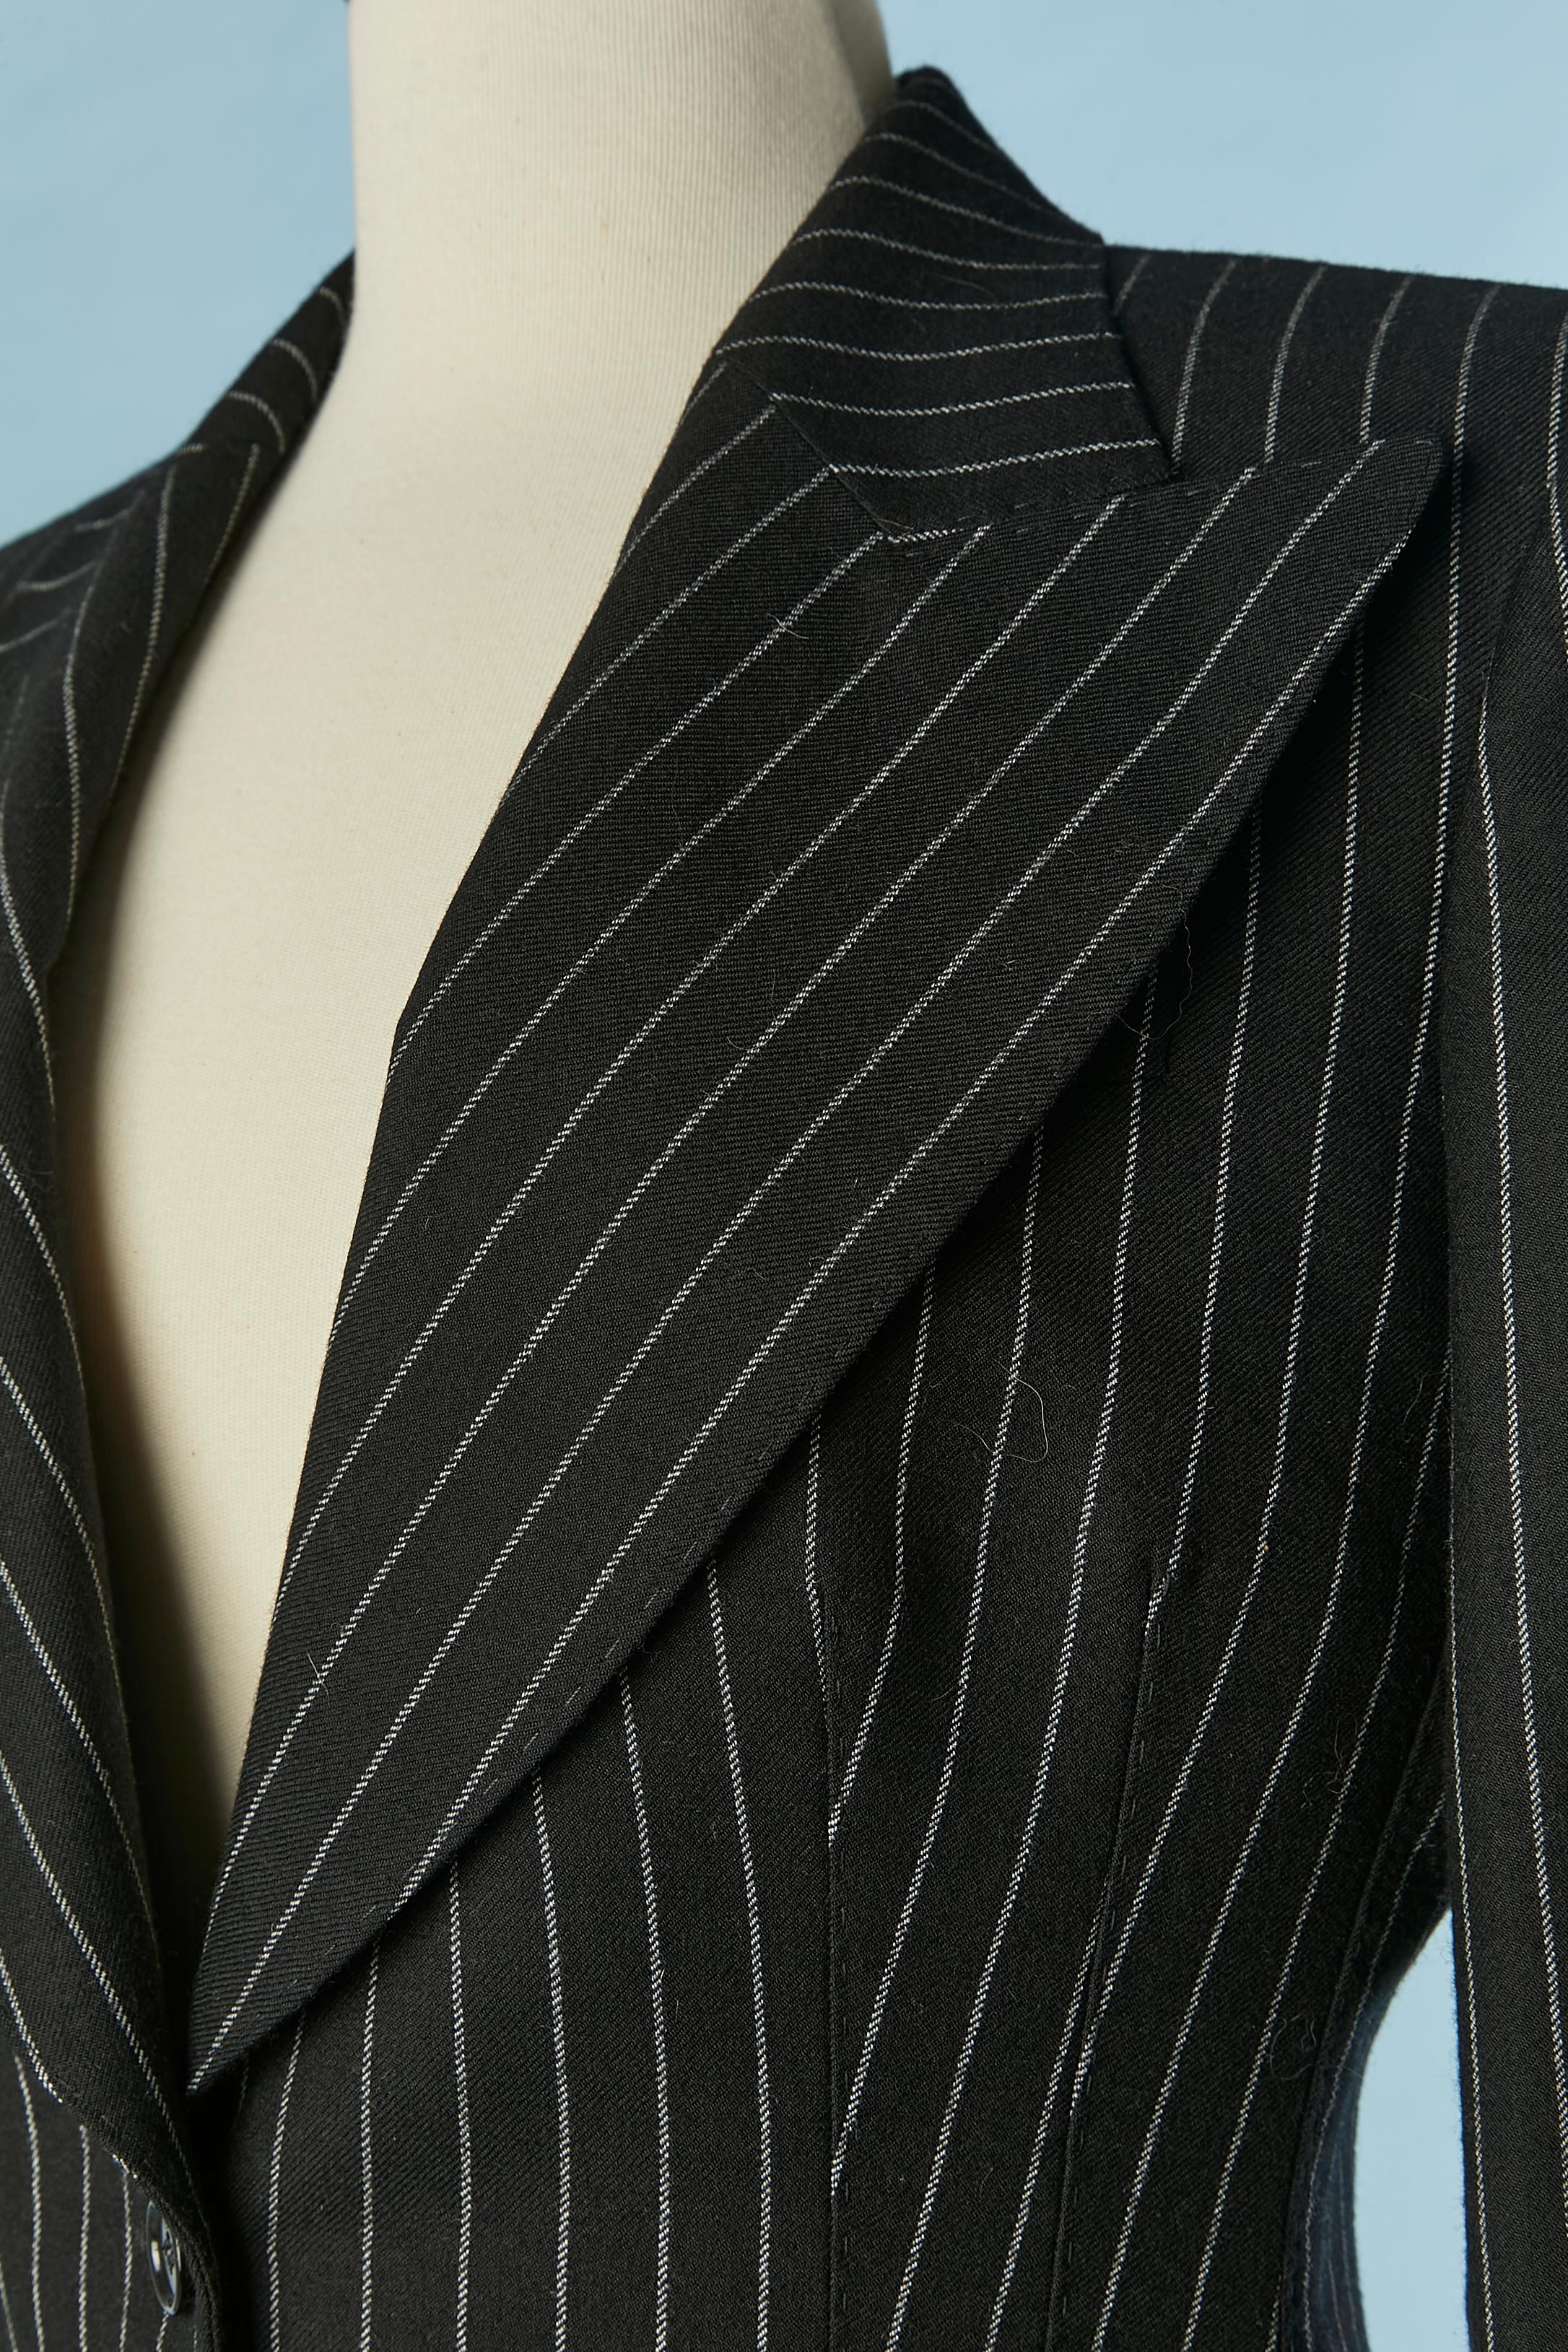 Black and white pin-striped trousers-suit. 
Main fabric composition: 96% wool, 4% polyester. Lining: 92% silk, 8% elasthane. 
Pocket on both side, shoulder-pad. 
SIZE 40 (It) M 
